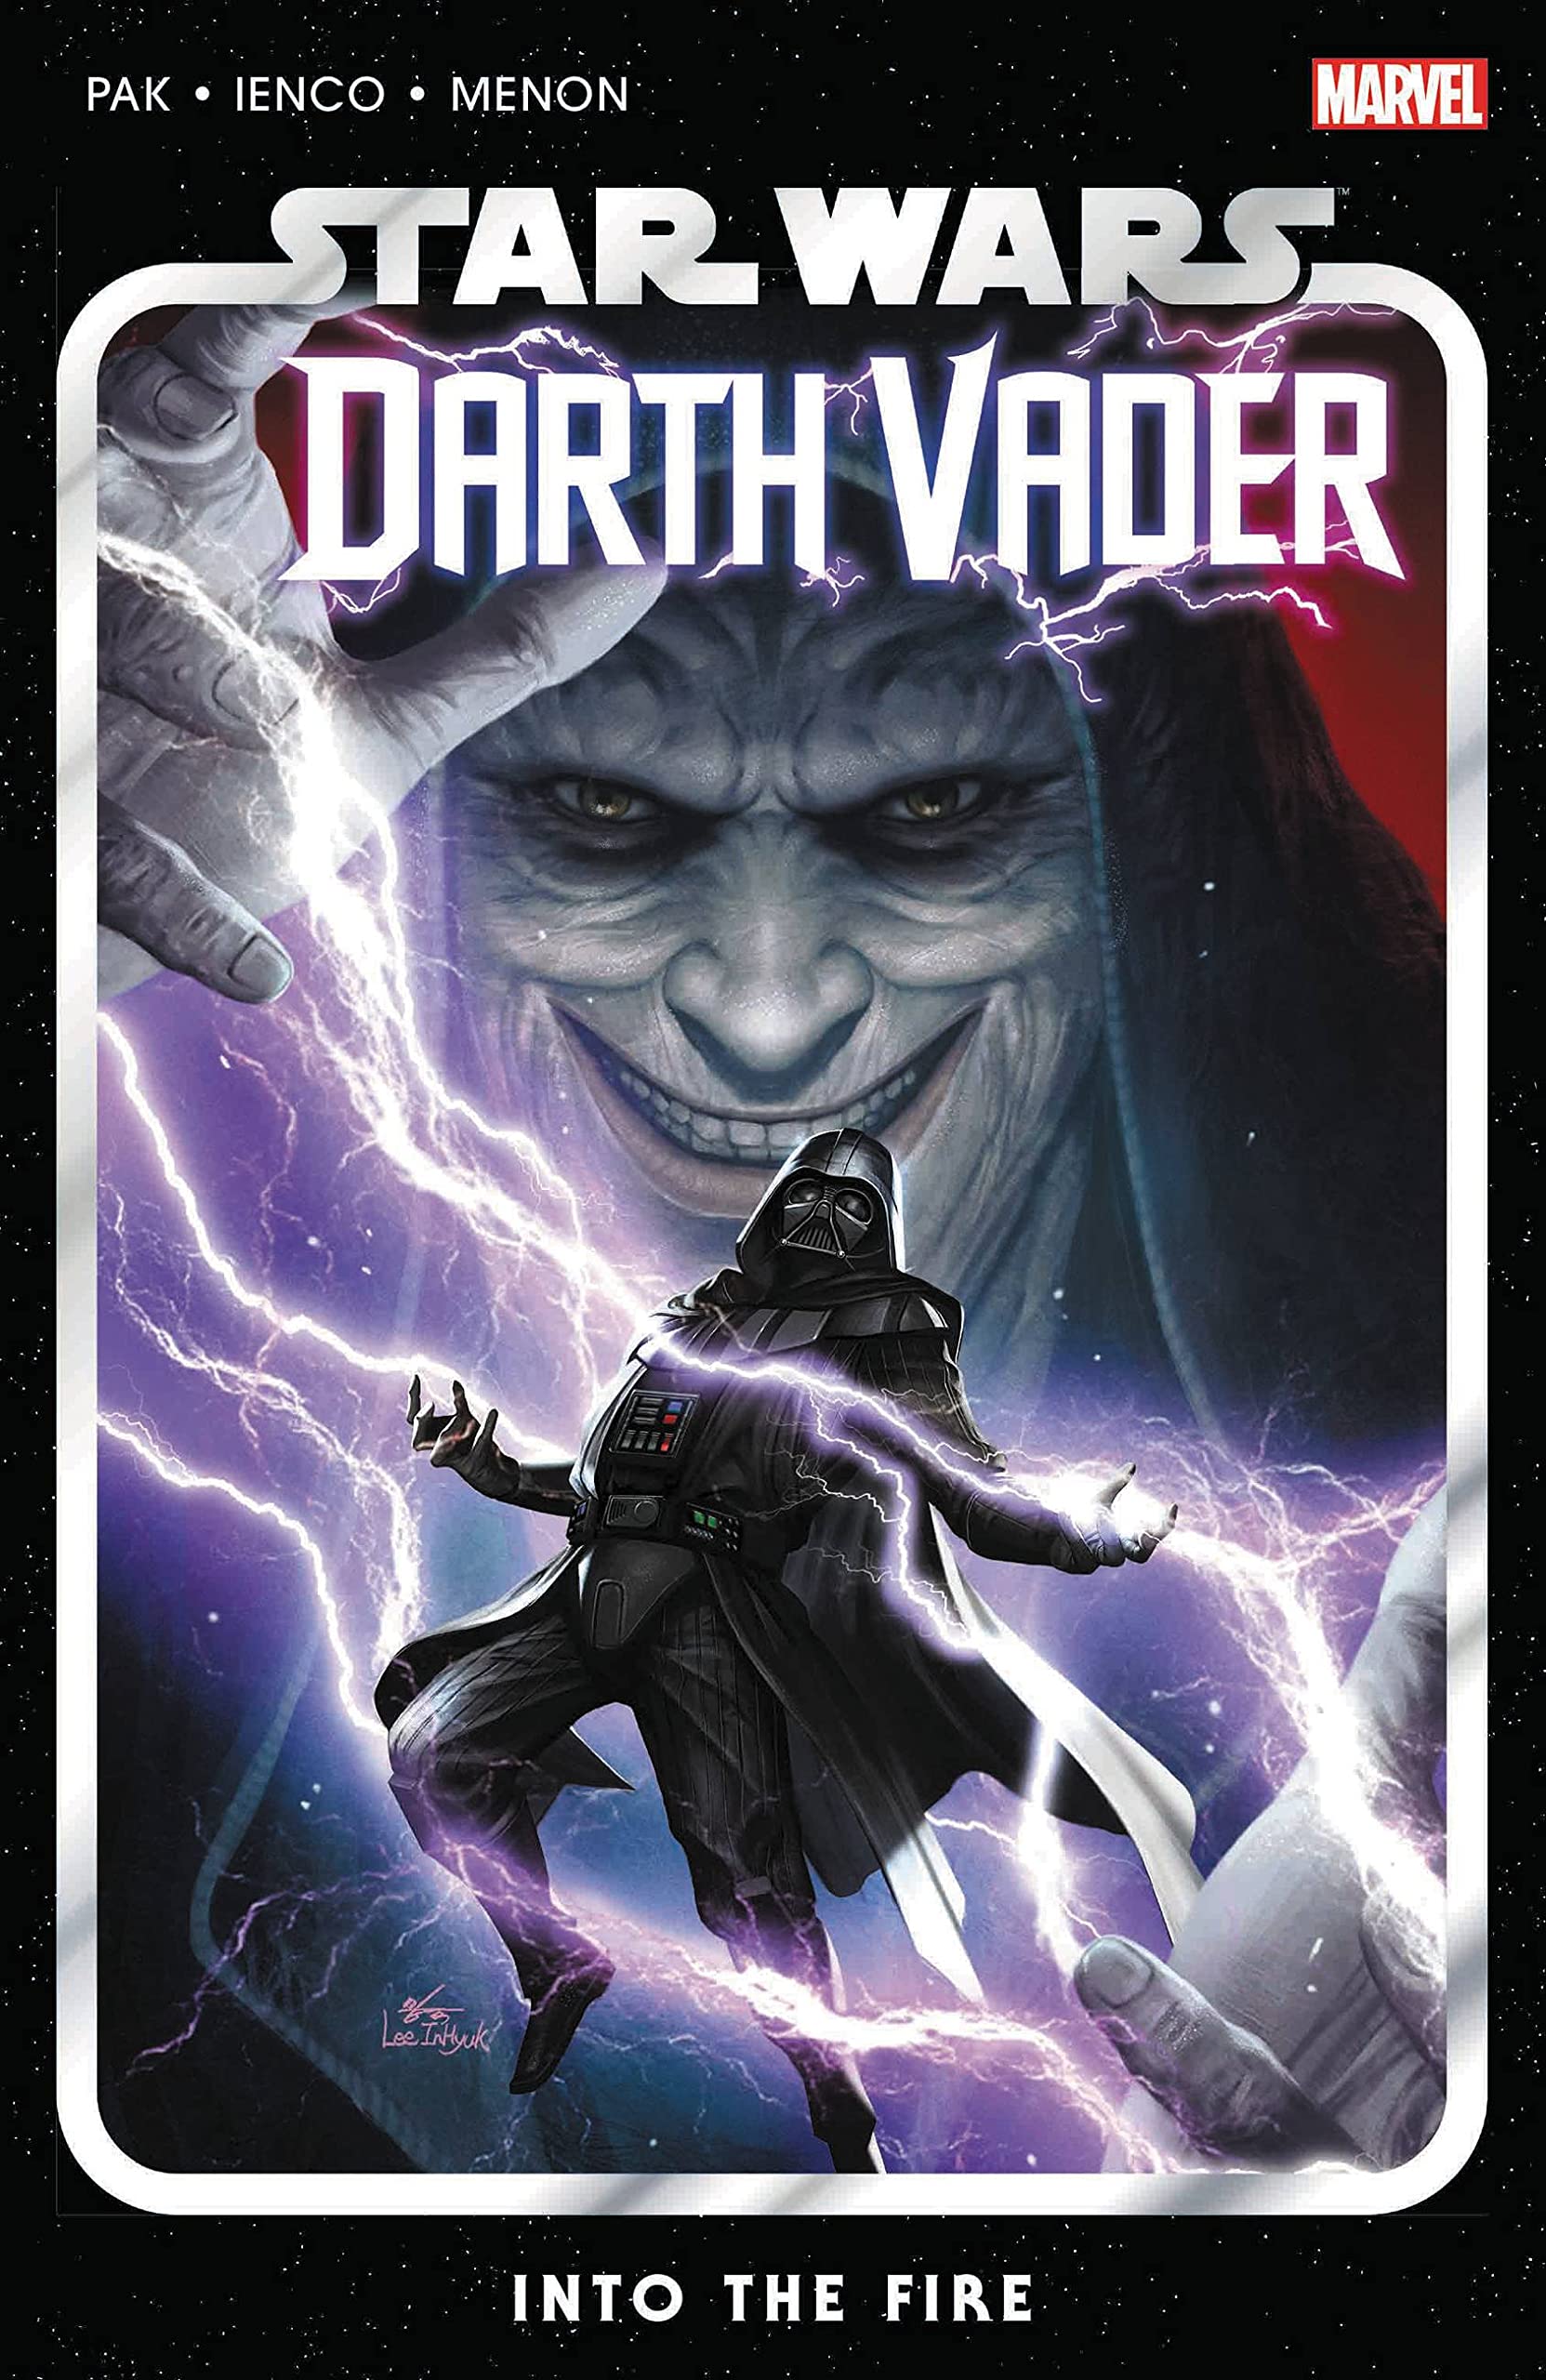 Star Wars: Darth Vader By Greg Pak - Into the Fire - Volume 2